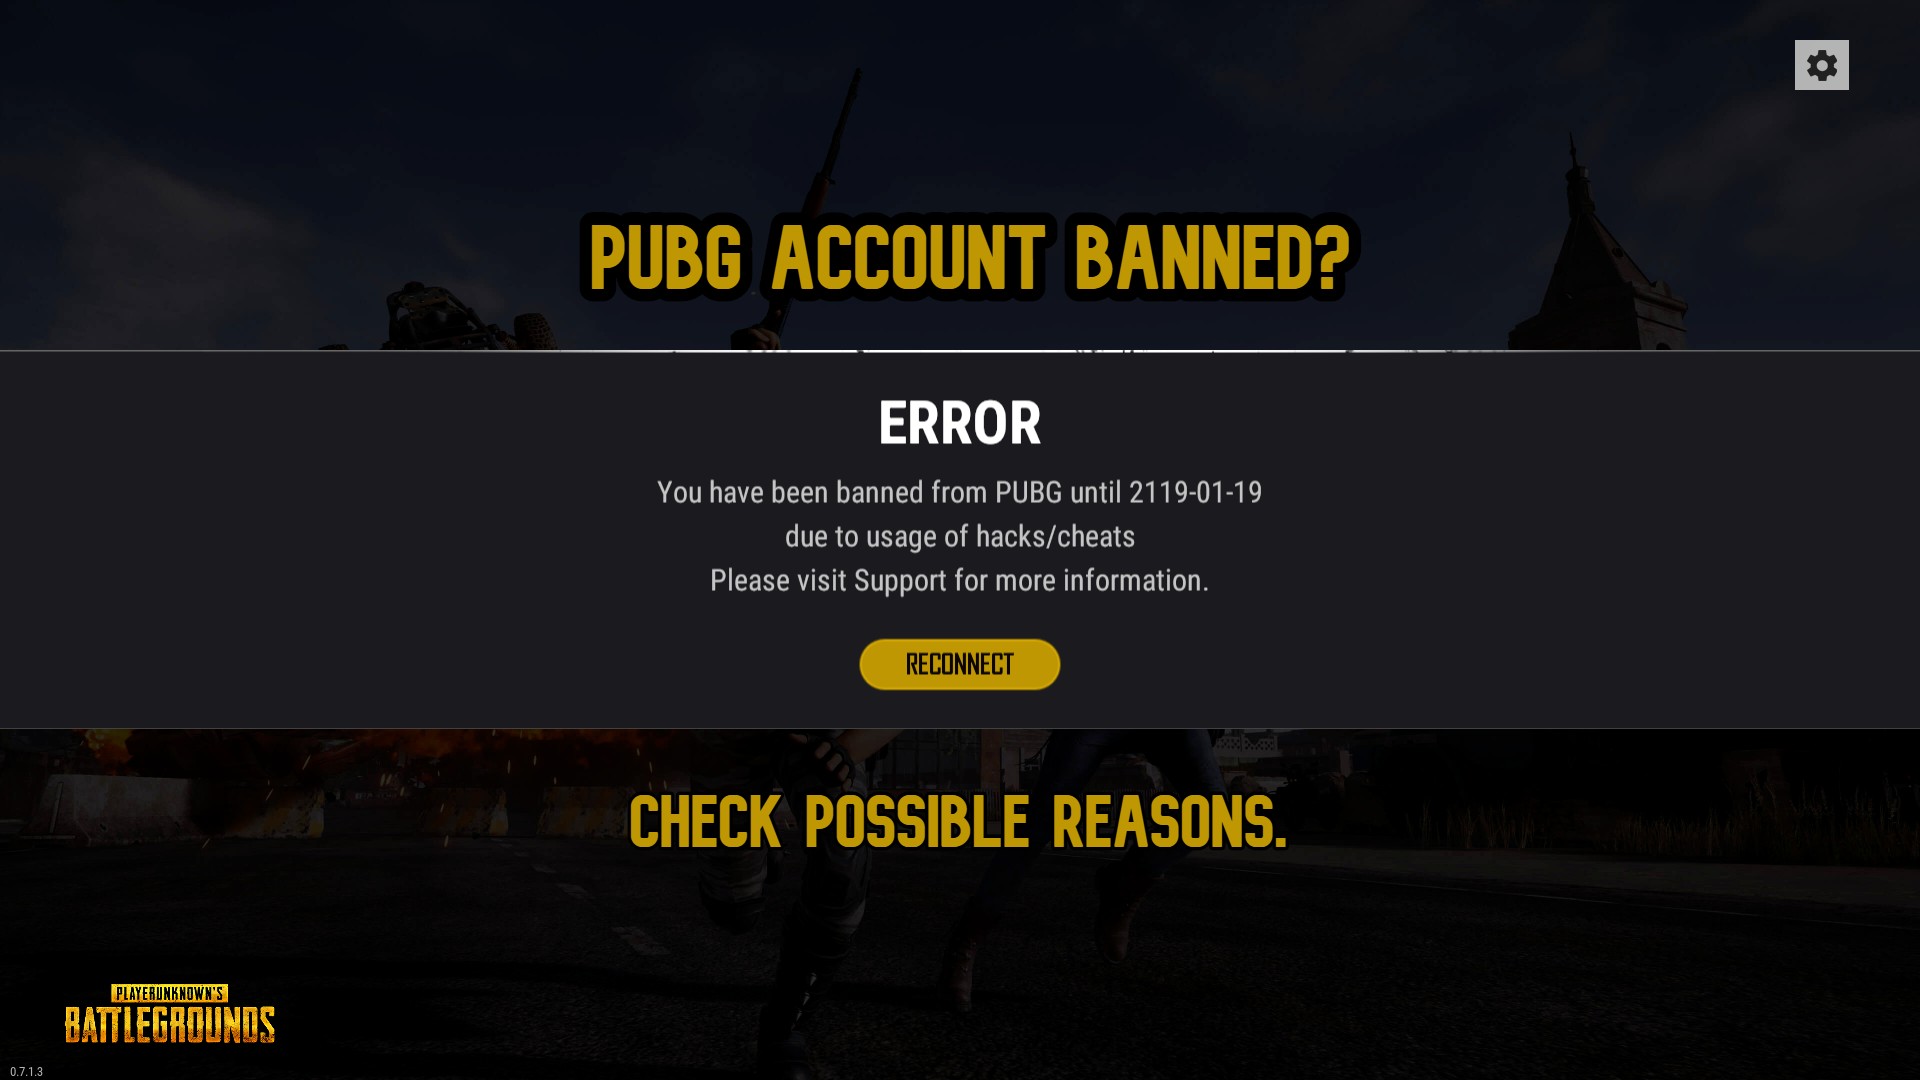 Pubg Account Banned? Check Here Possible Reasons